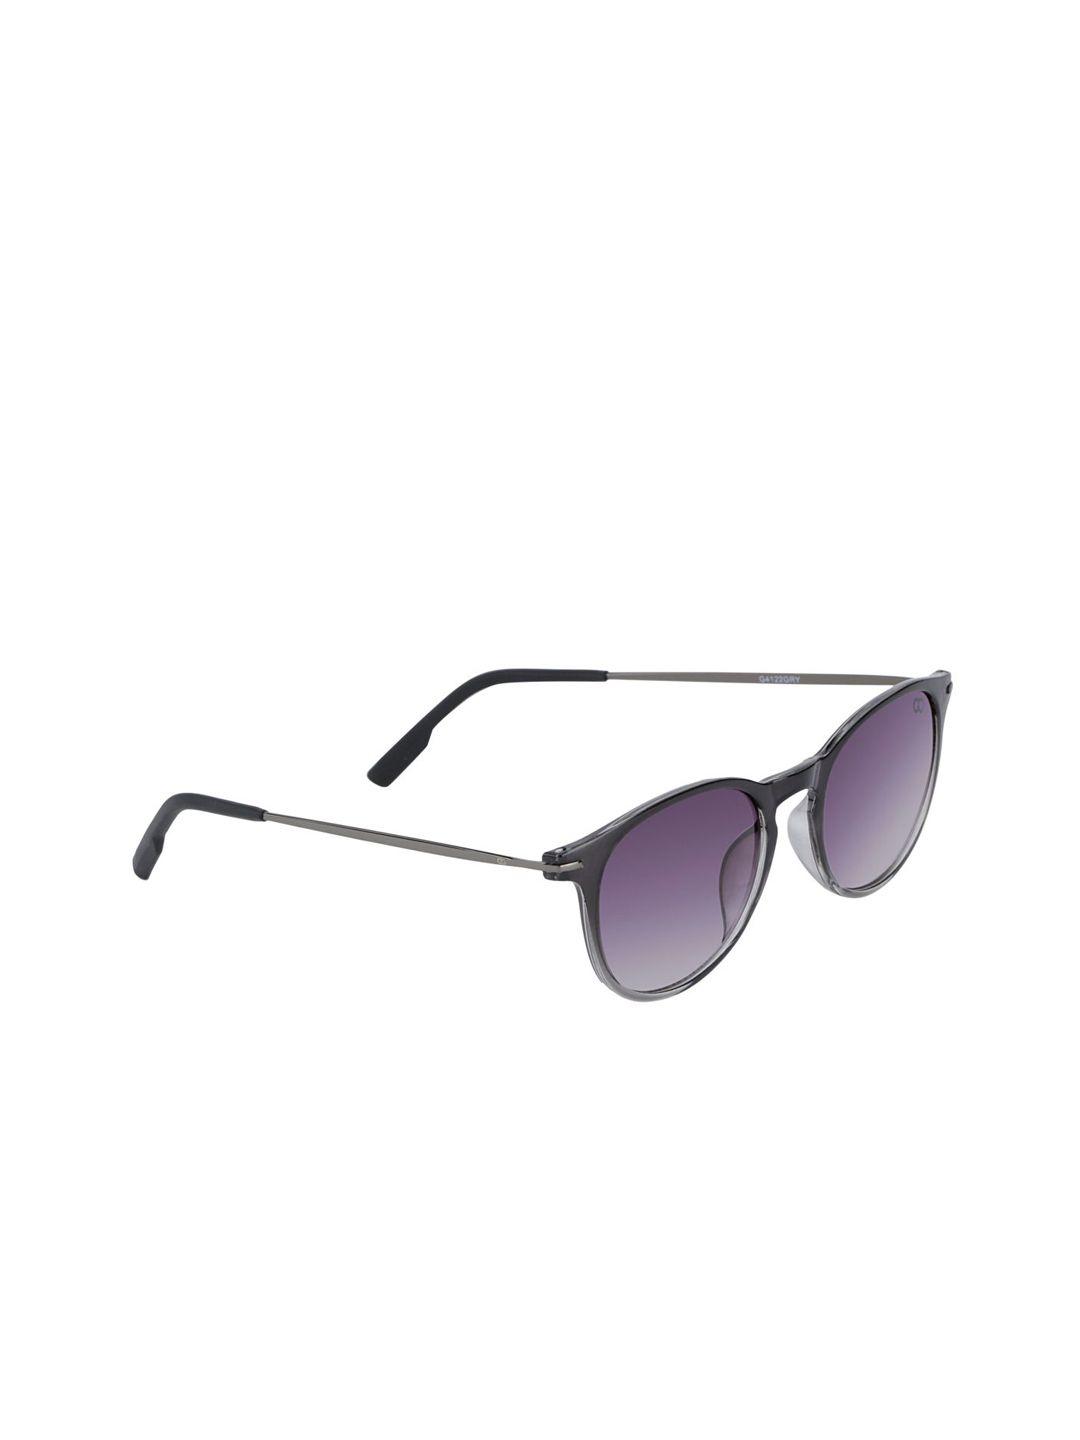 gio-collection-women-oval-sunglasses-g4122gry